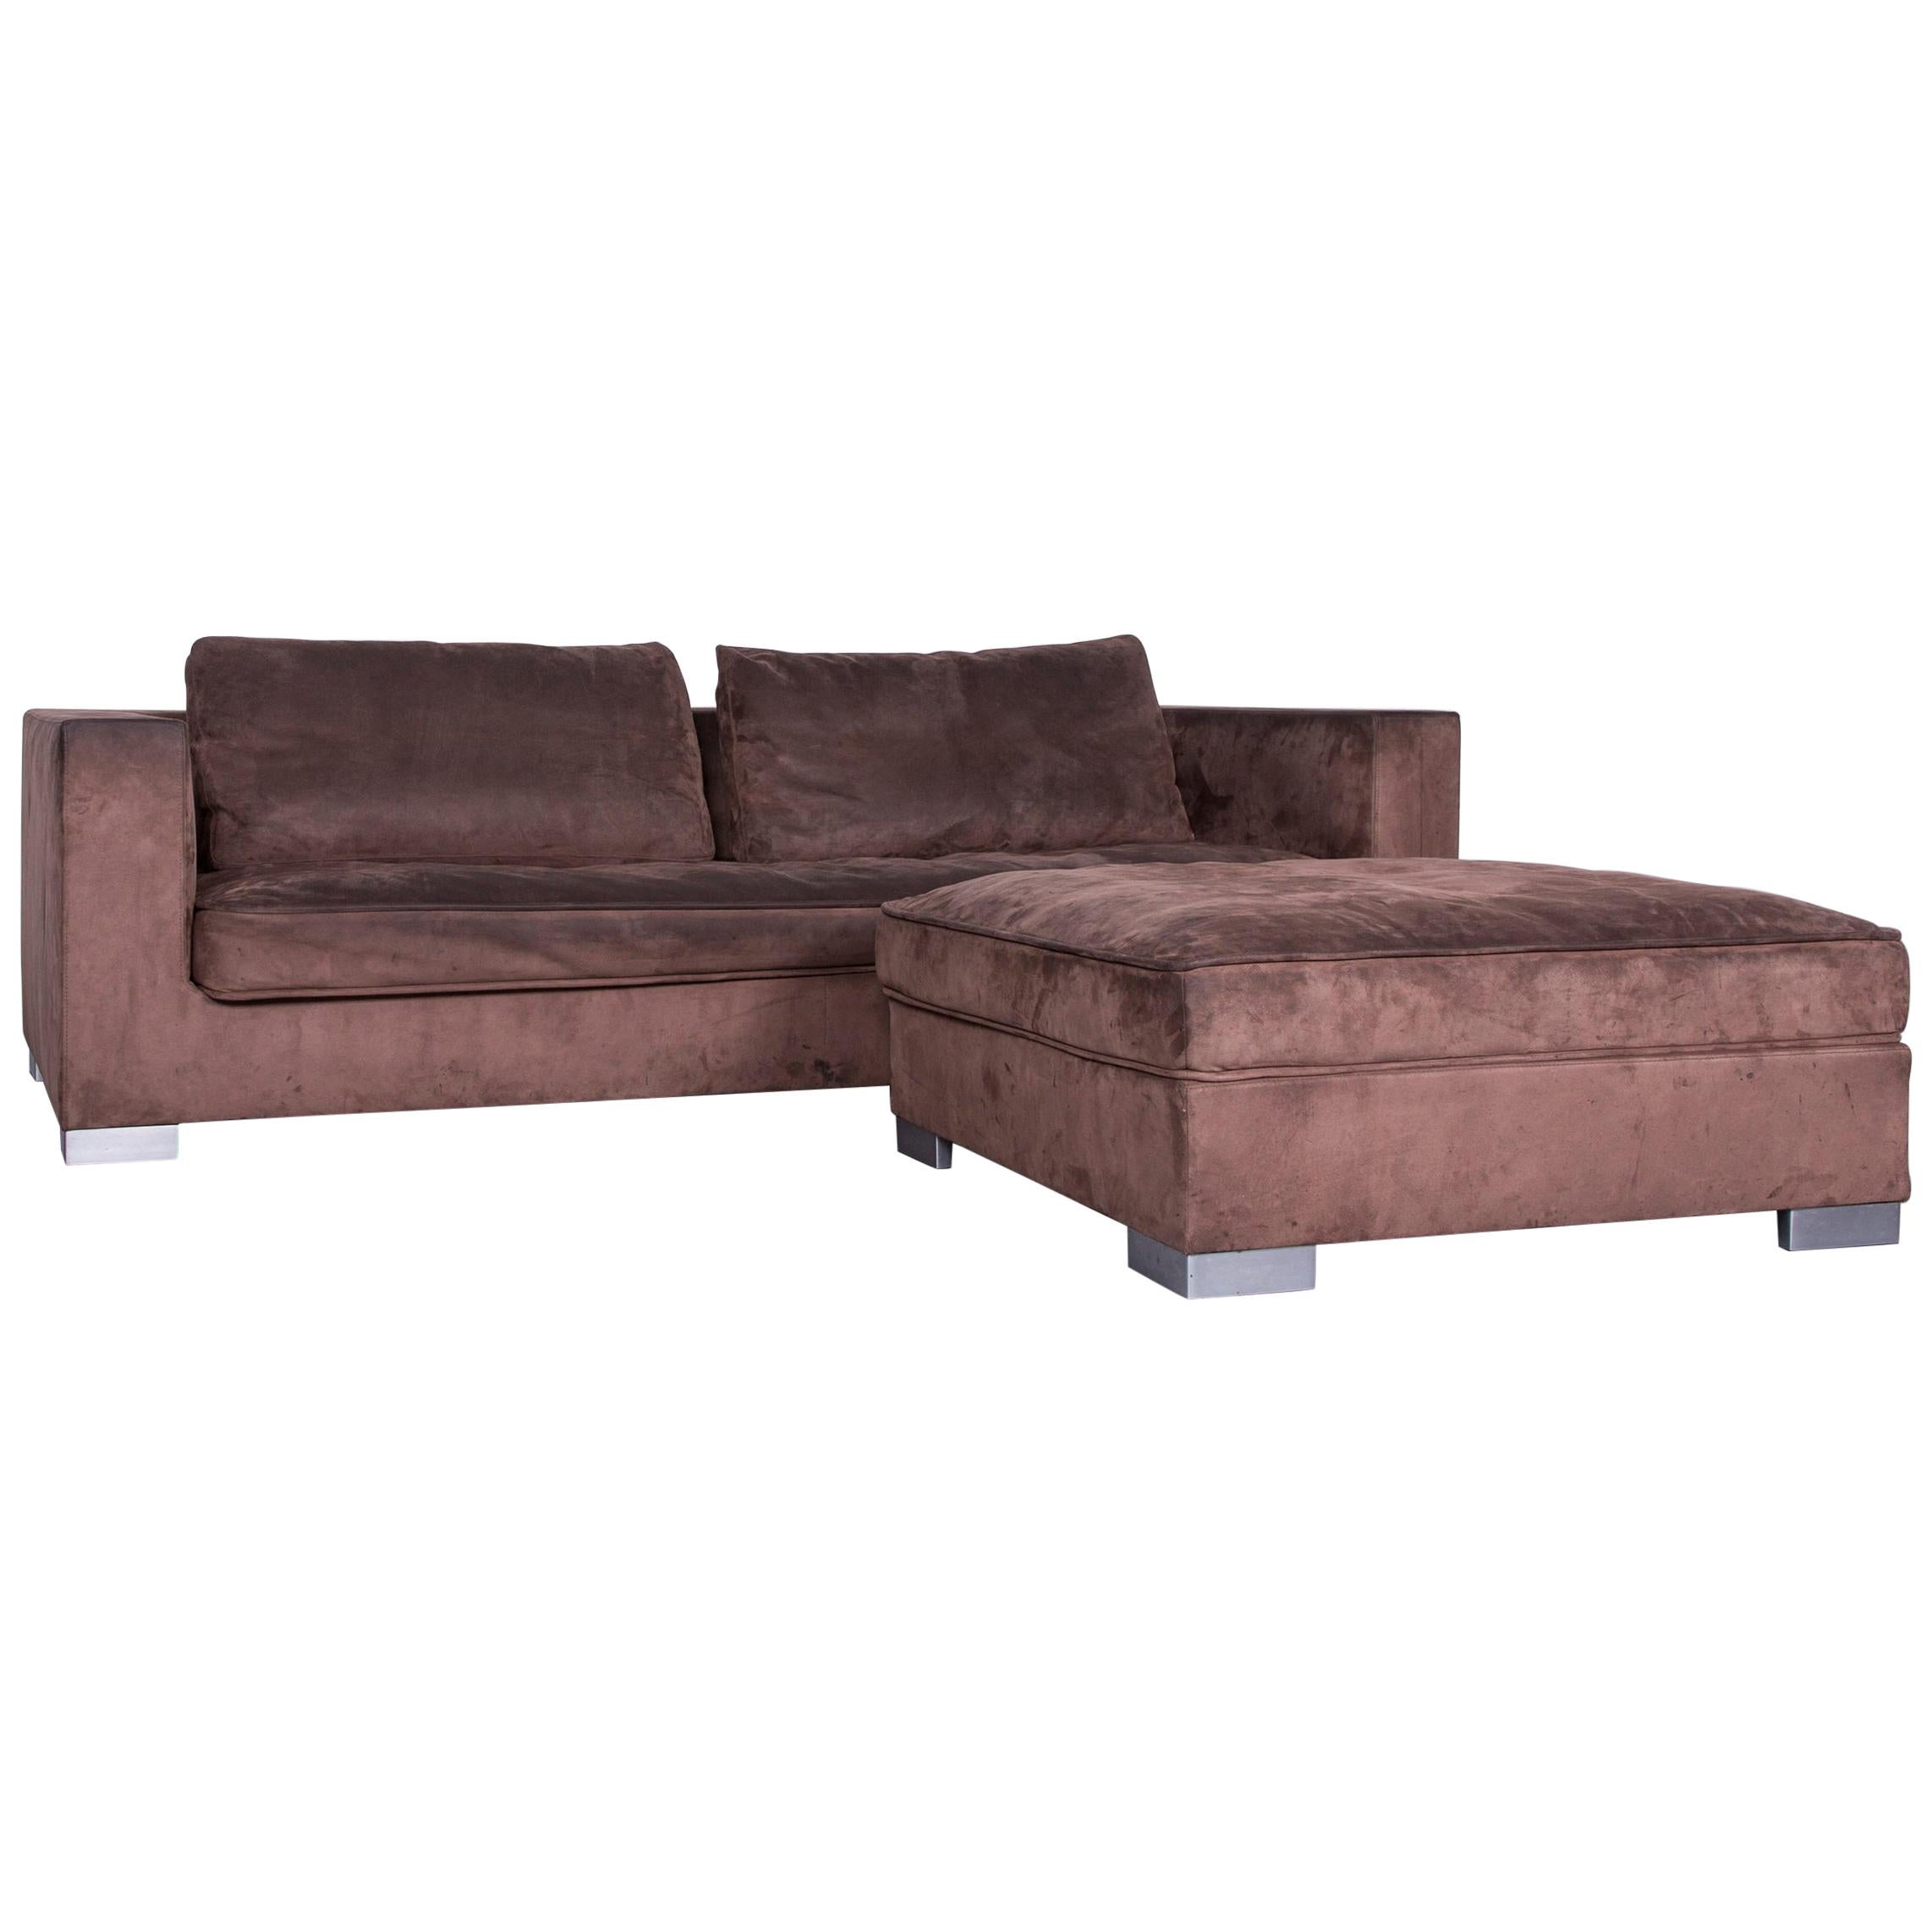 Ligne Roset Rive Gauche Designer Fabric Sofa Footstool Set Brown Two-Seat Couch